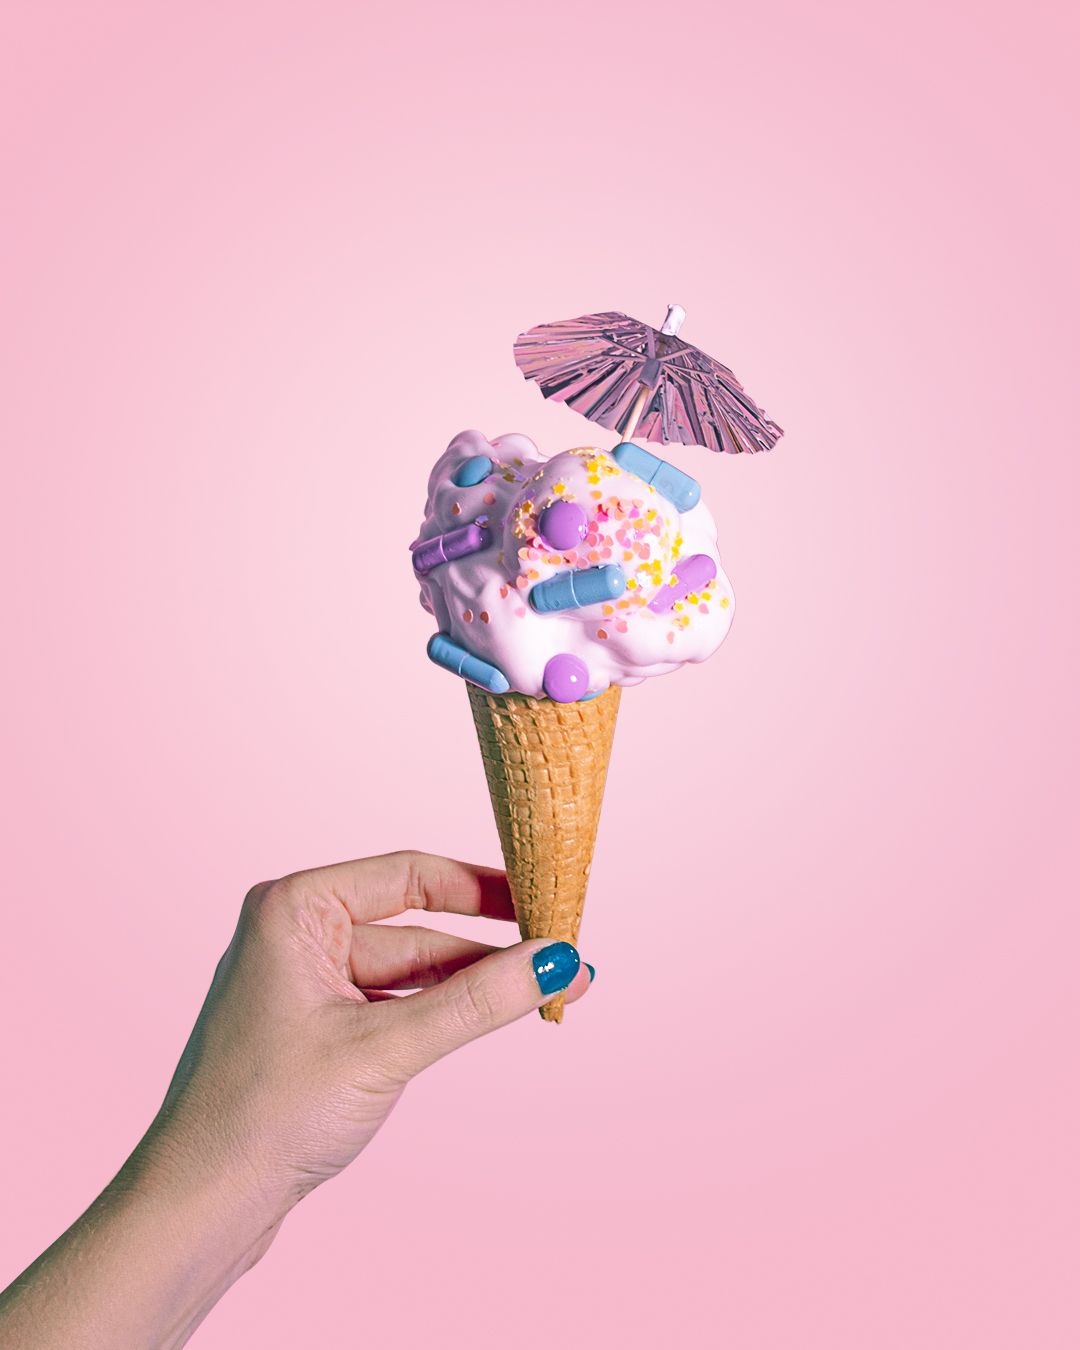 A hand holding a cone with a colorful ice cream and a pink umbrella on a pink background - Ice cream